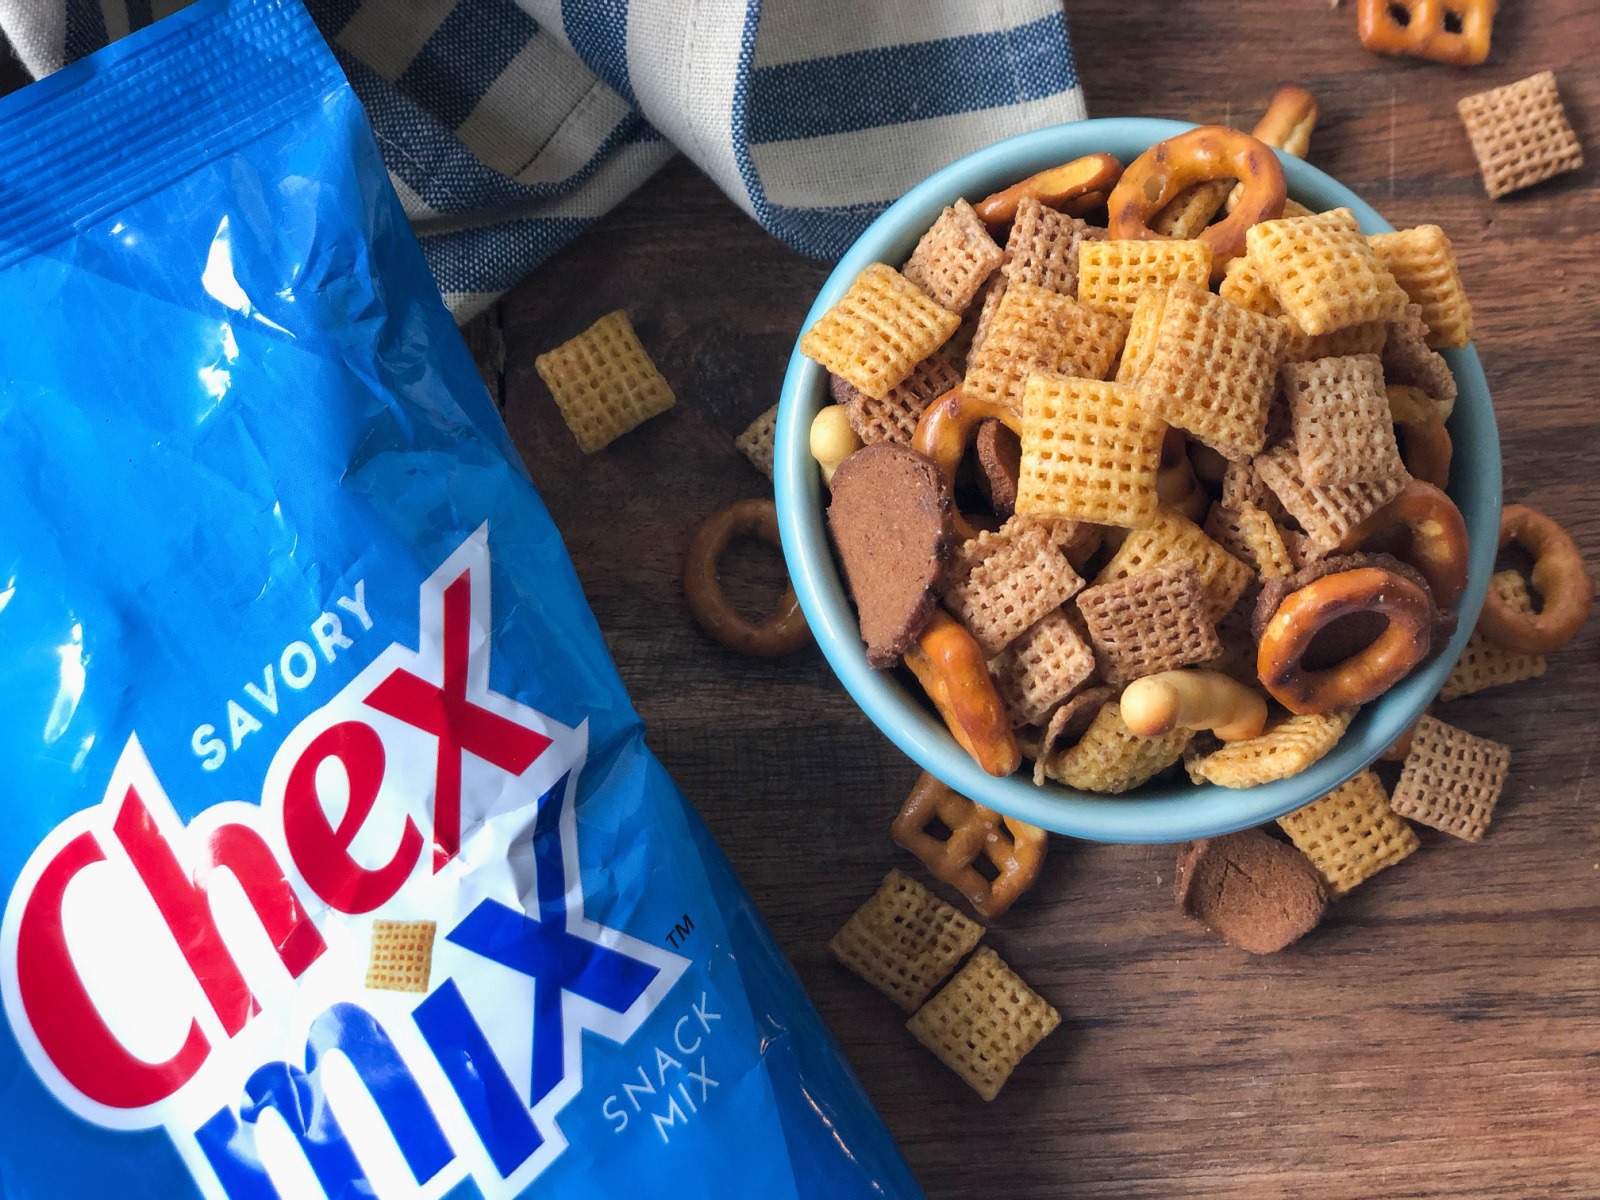 Get Chex Mix For As Little As $1.80 Per Bag At Publix